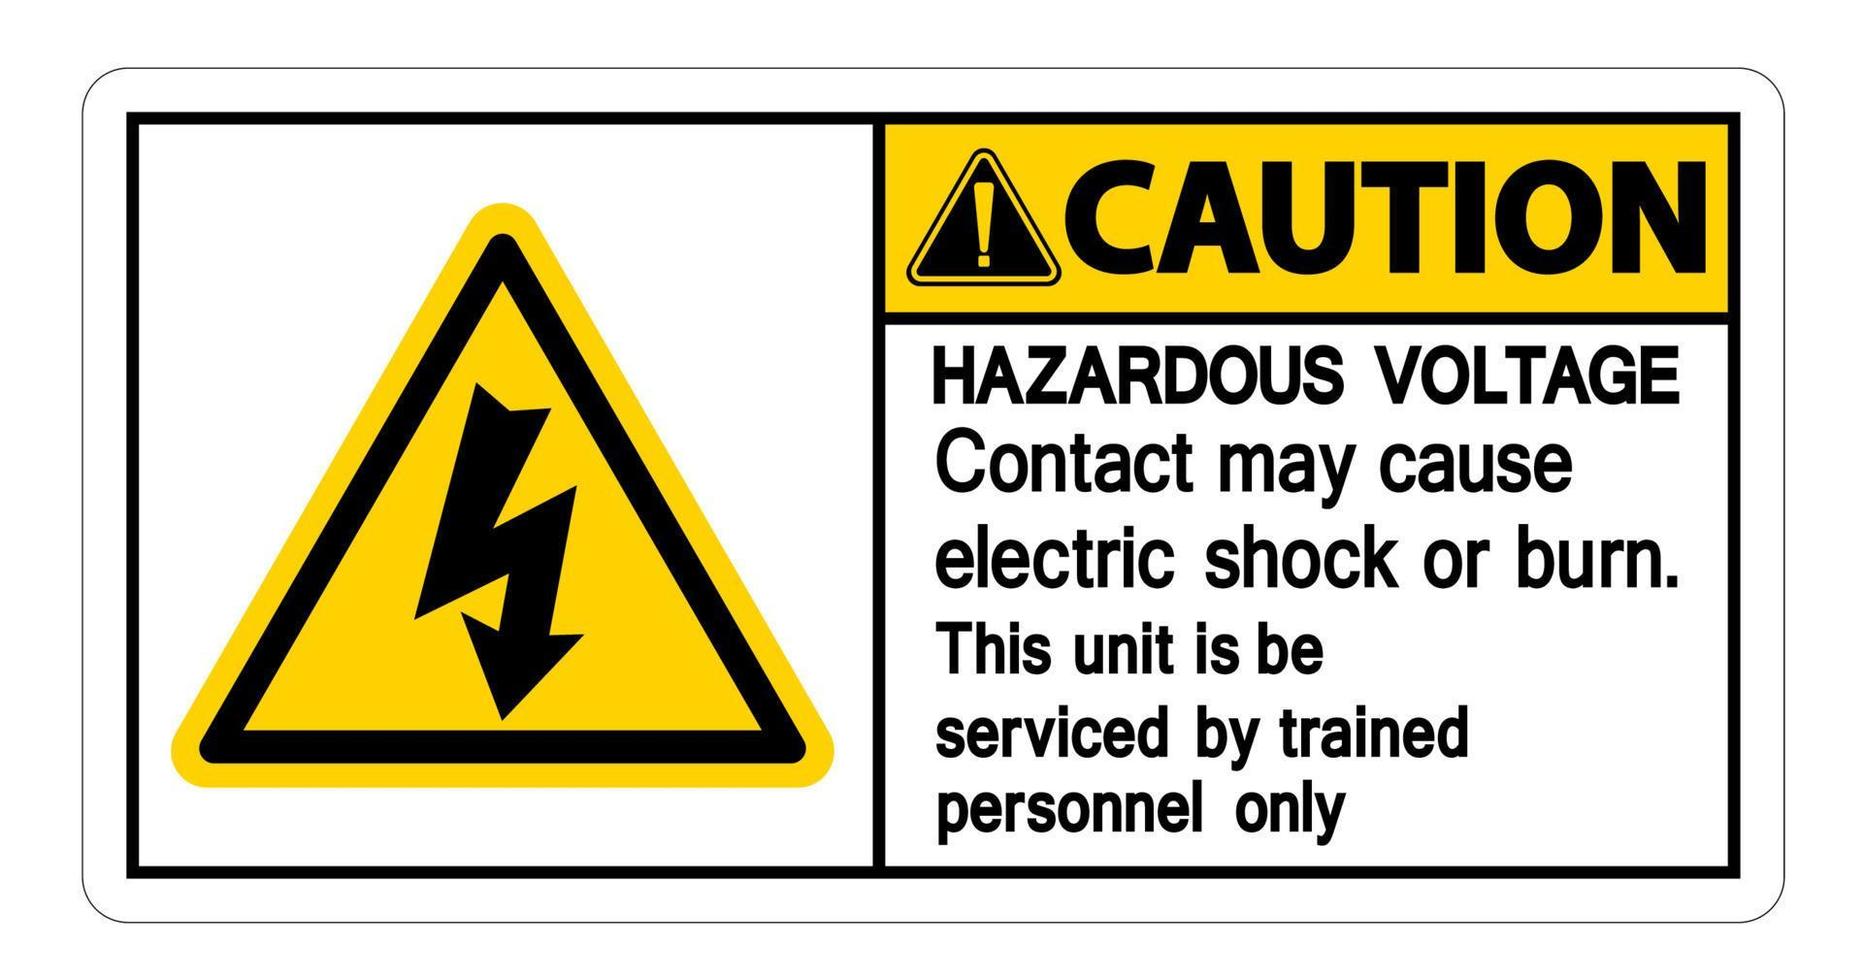 Hazardous Voltage Contact May Cause Electric Shock Or Burn Sign On White Background vector